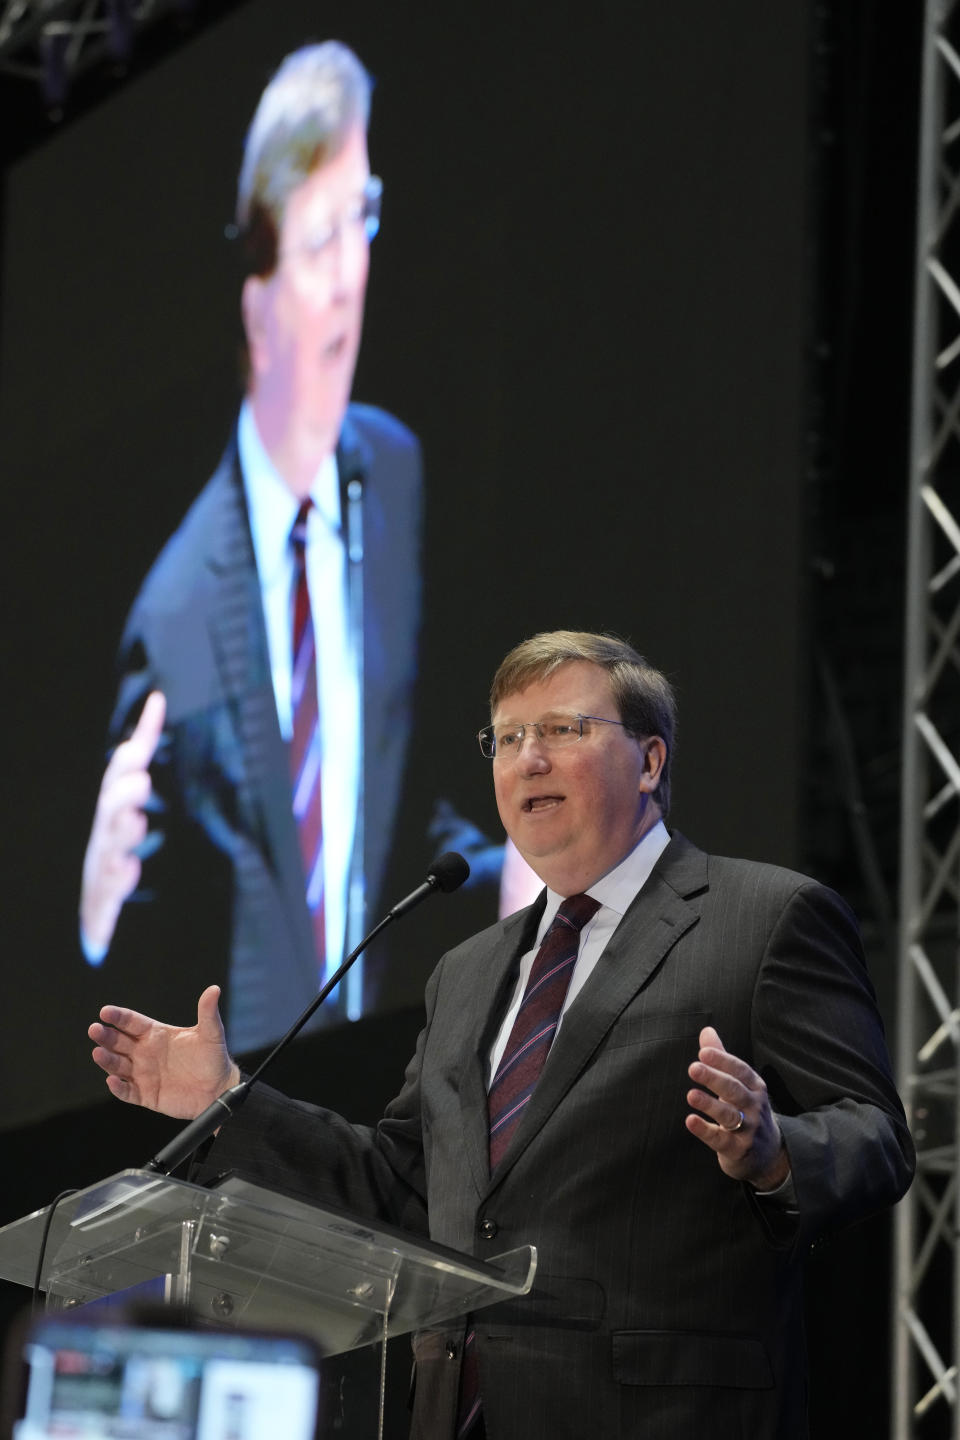 Mississippi Gov. Tate Reeves, who is running for reelection, addresses a group of business leaders at the 2023 Hobnob, a business forum sponsored by the Mississippi Economic Council, in Jackson, Miss., Thursday, Oct. 26, 2023. (AP Photo/Rogelio V. Solis)